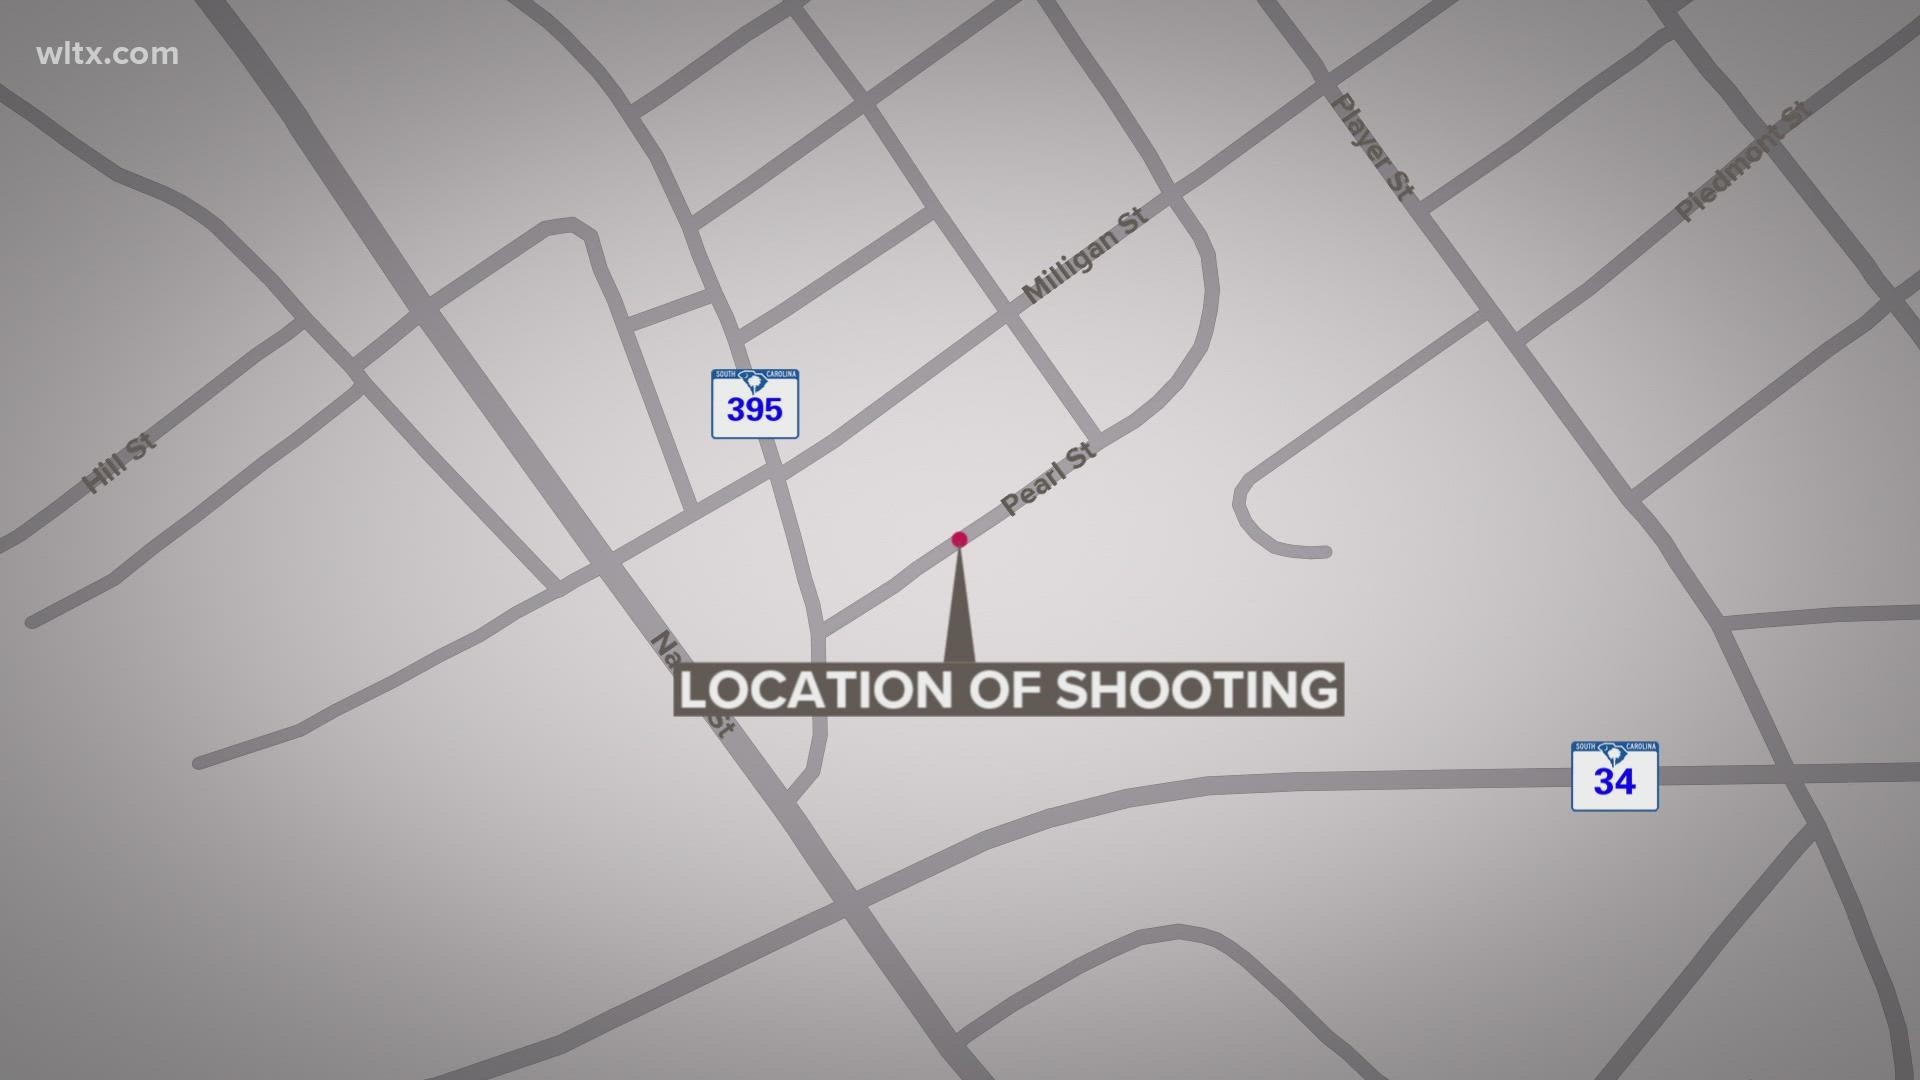 The shooting happened around 10:30 p.m. on Thursday on Pearl Street.